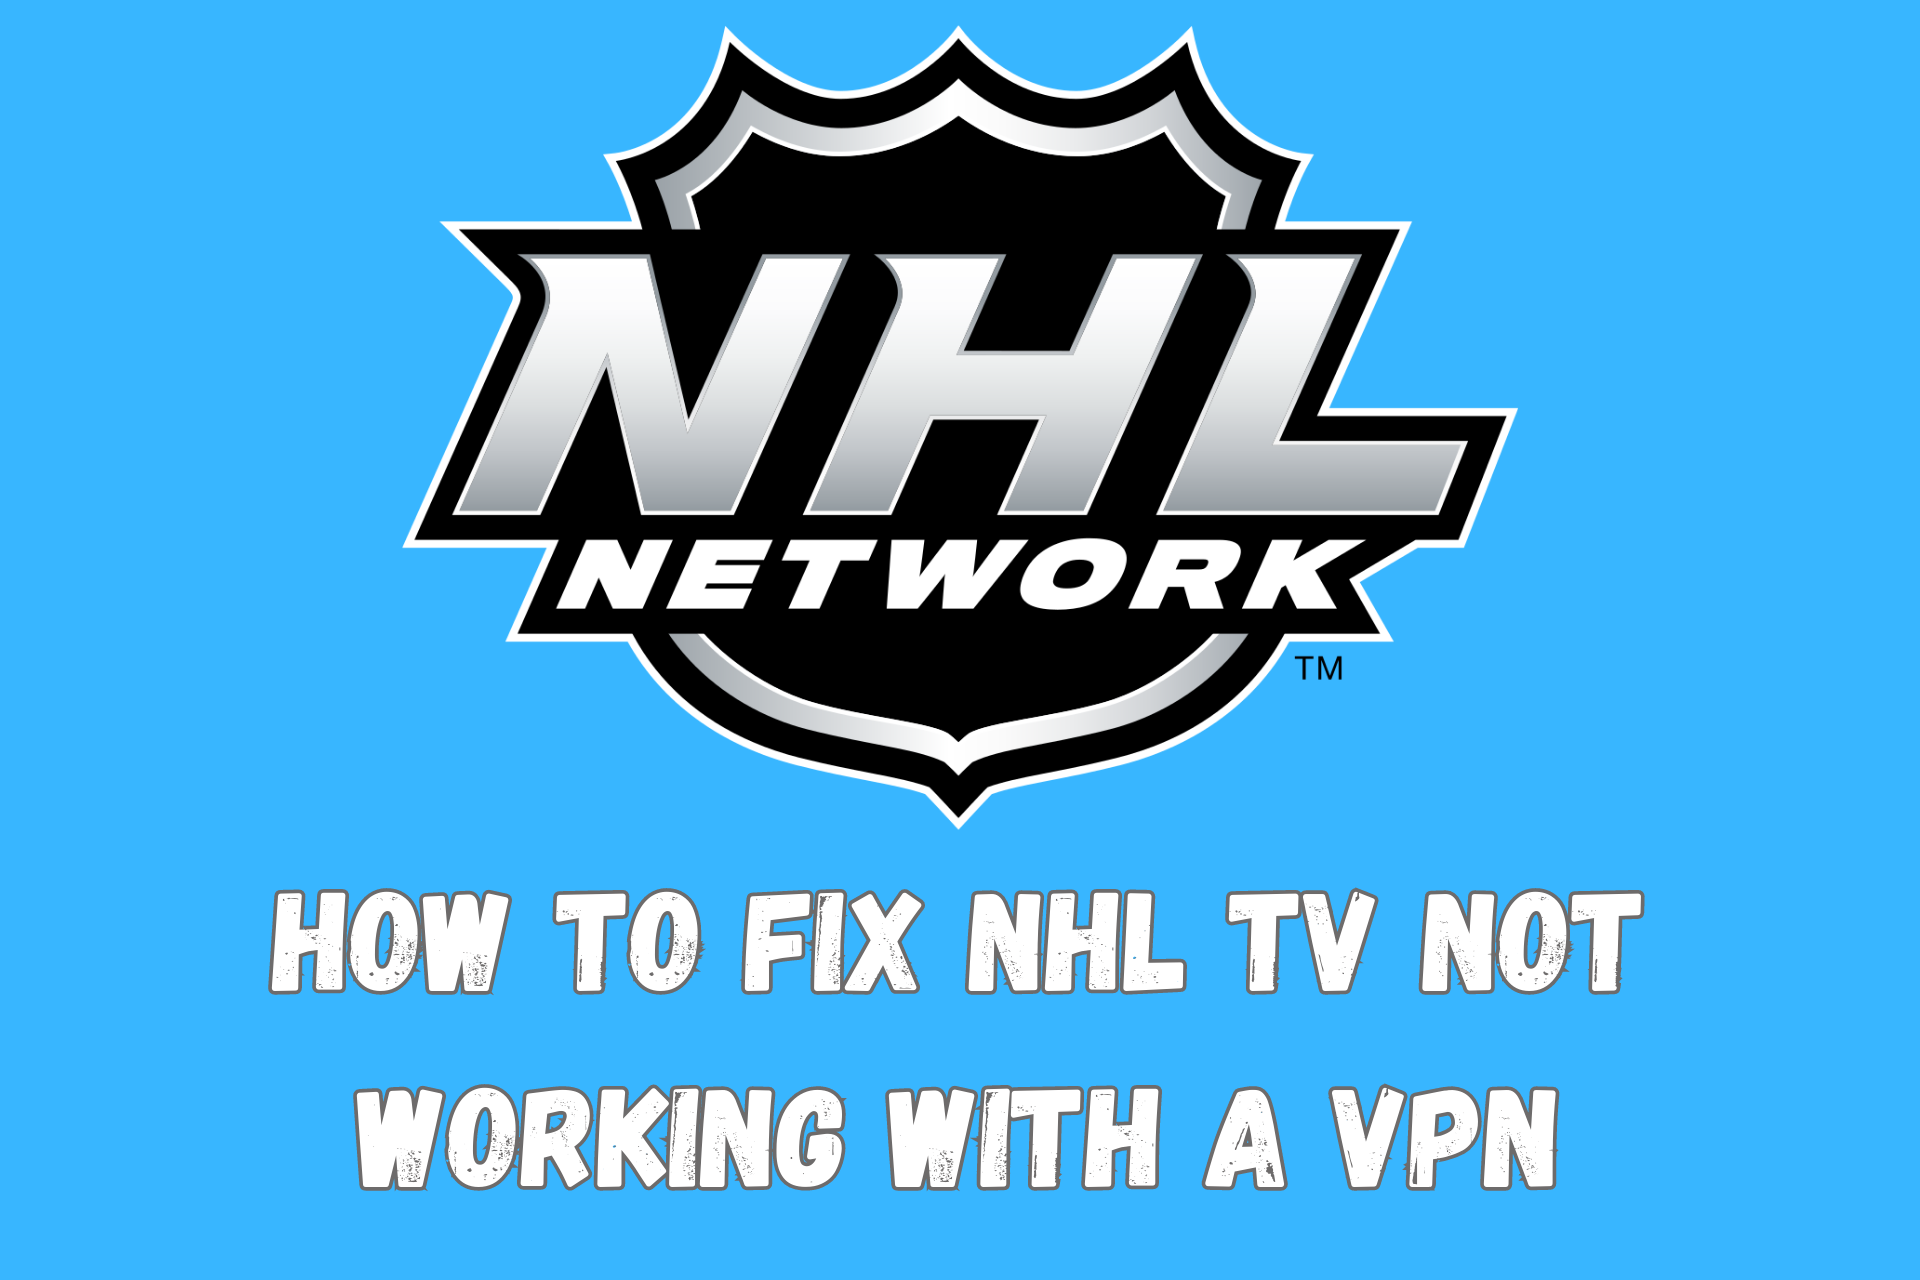 NHL TV Not Working With VPN? Here‘s How to Fix It Quickly